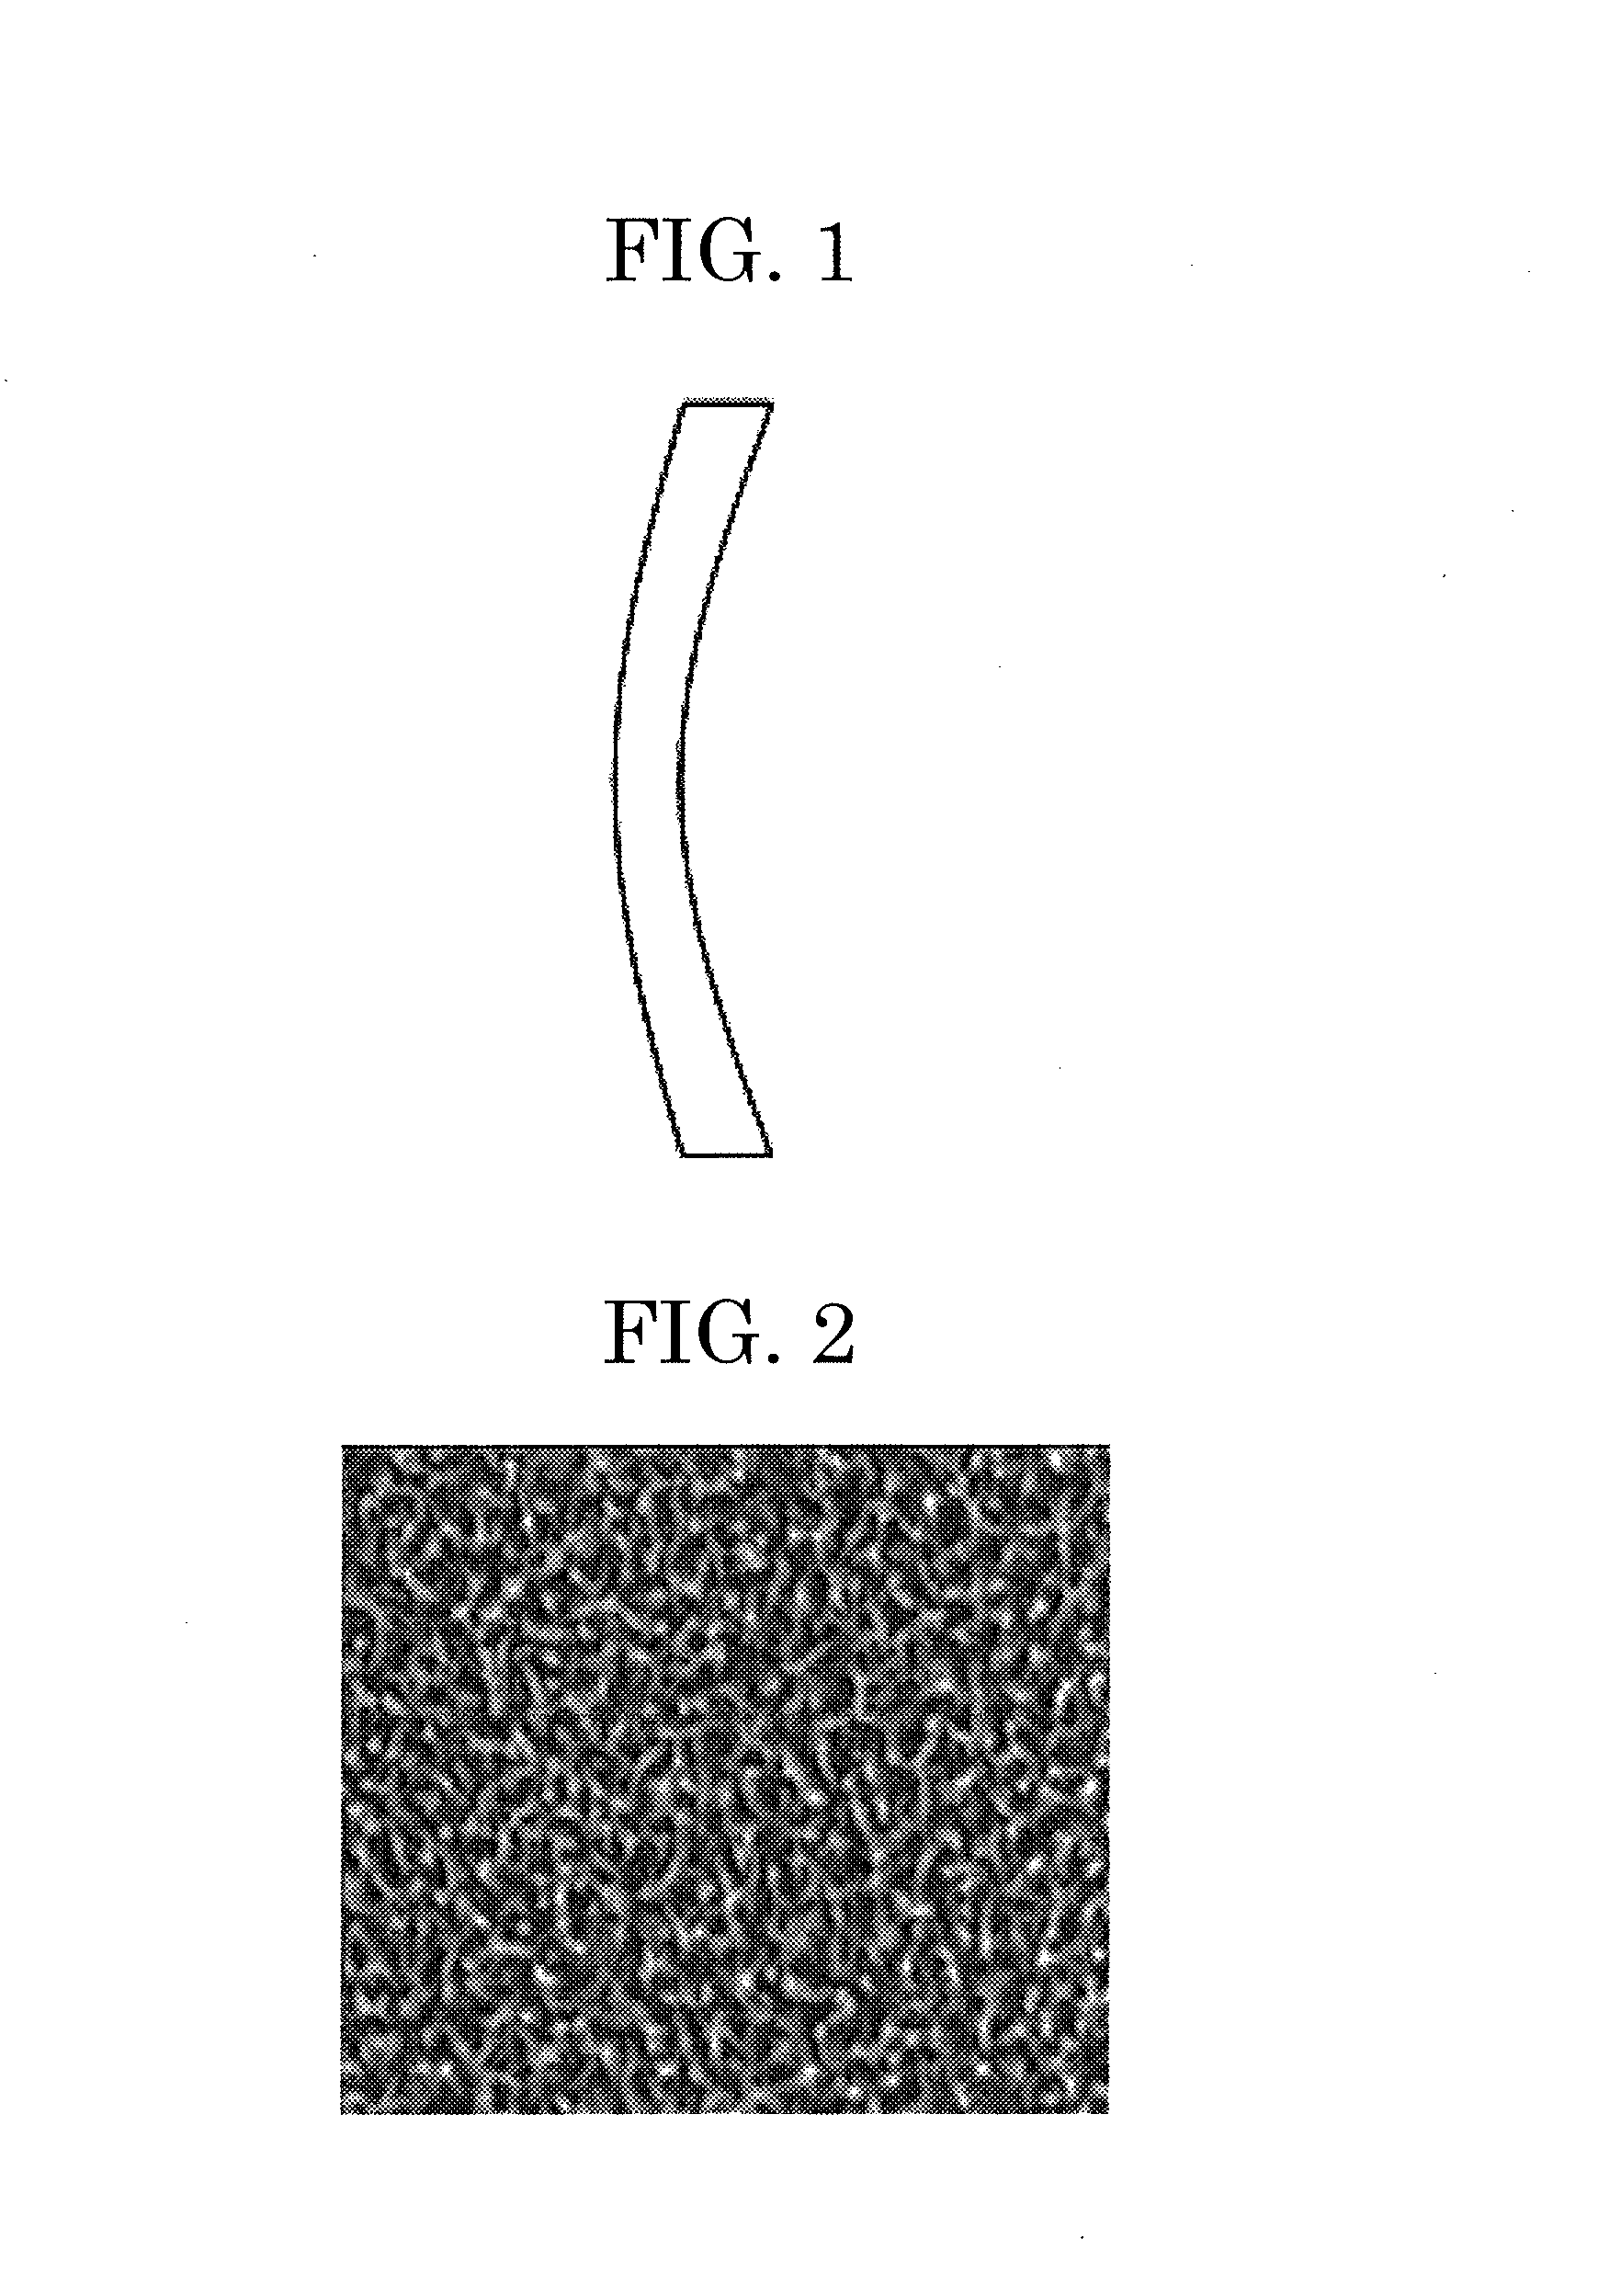 Optical member and method for producing same